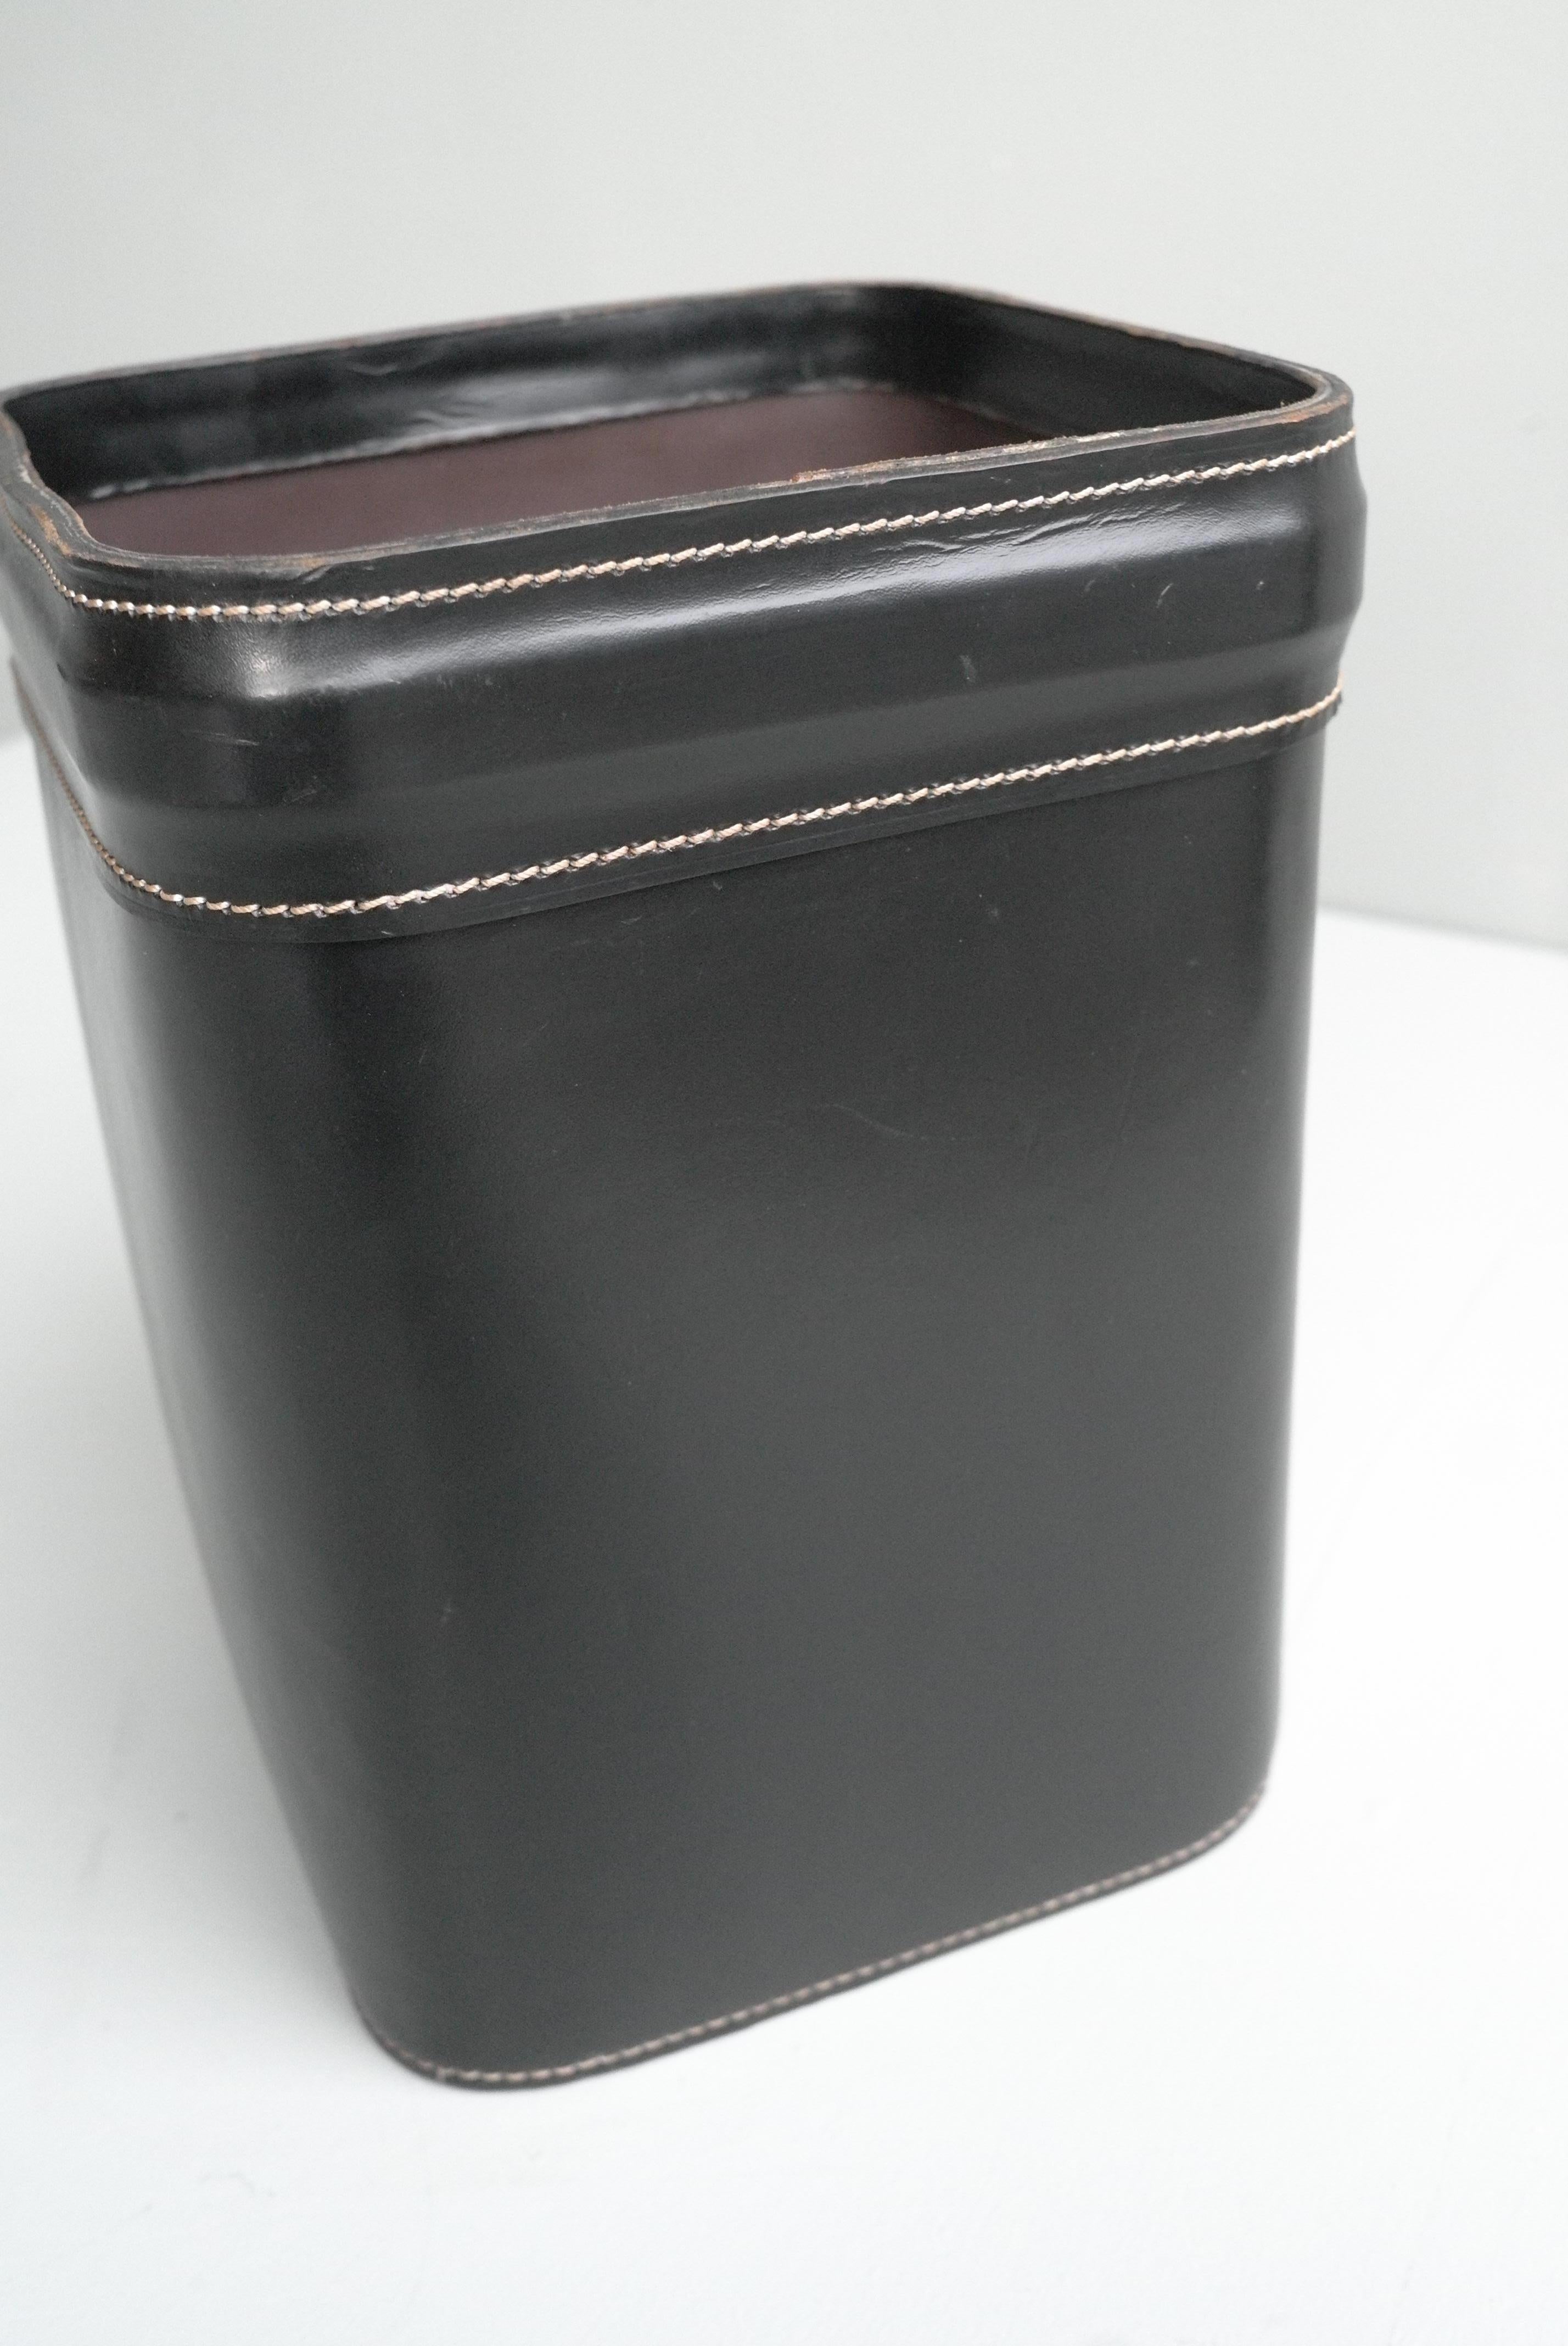 French Hand Stitched Black Leather Waste Paper Basket 1